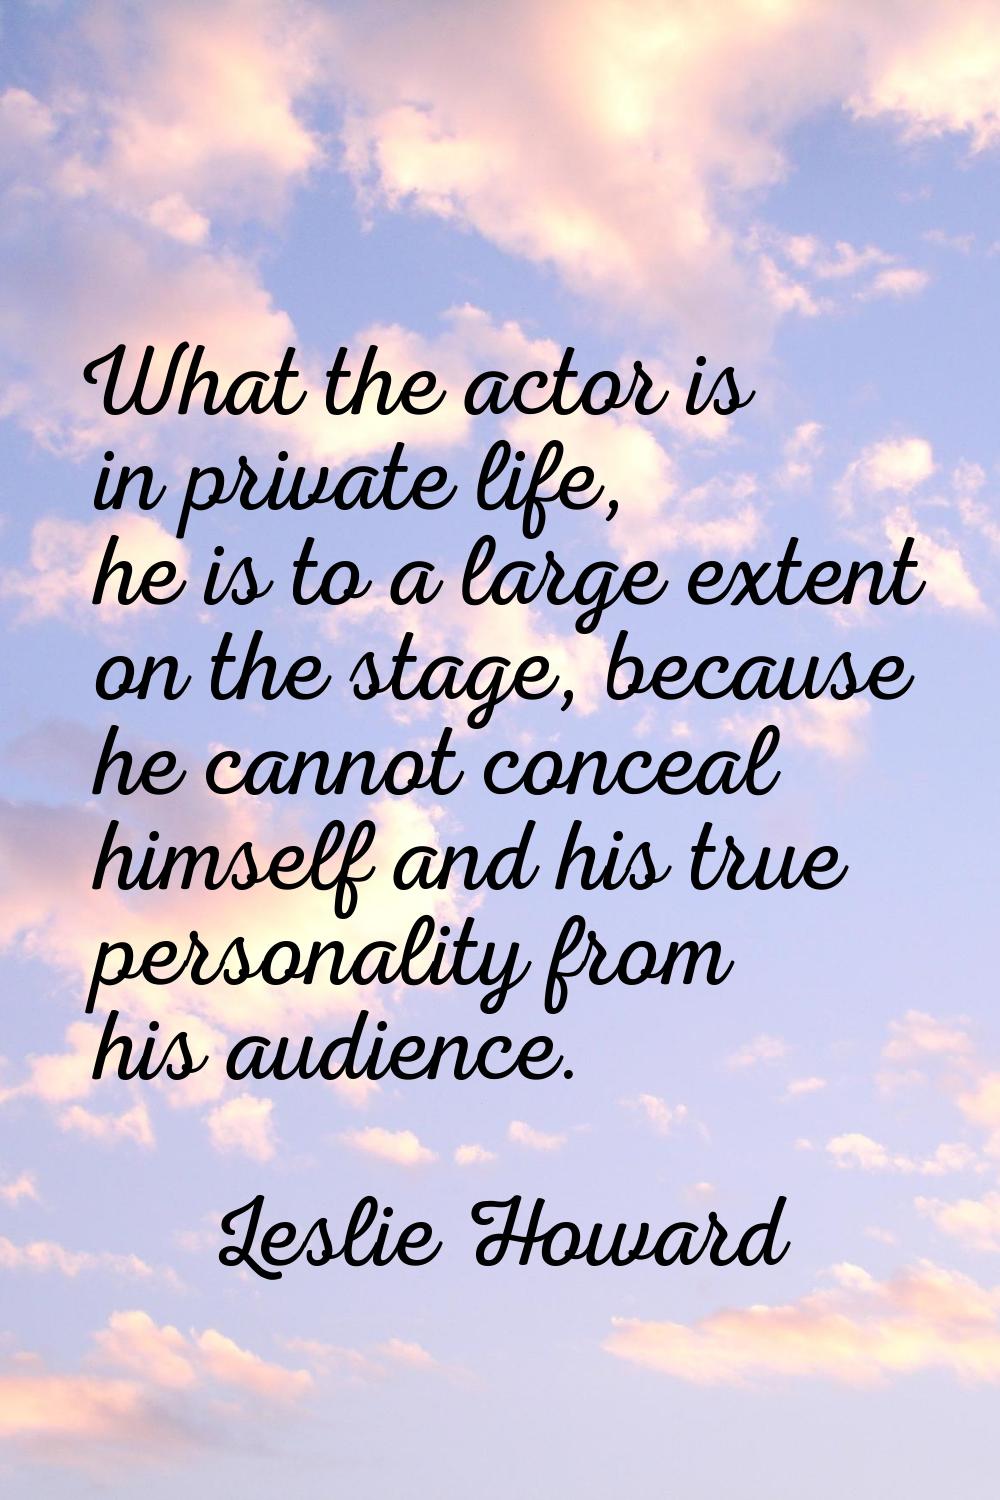 What the actor is in private life, he is to a large extent on the stage, because he cannot conceal 